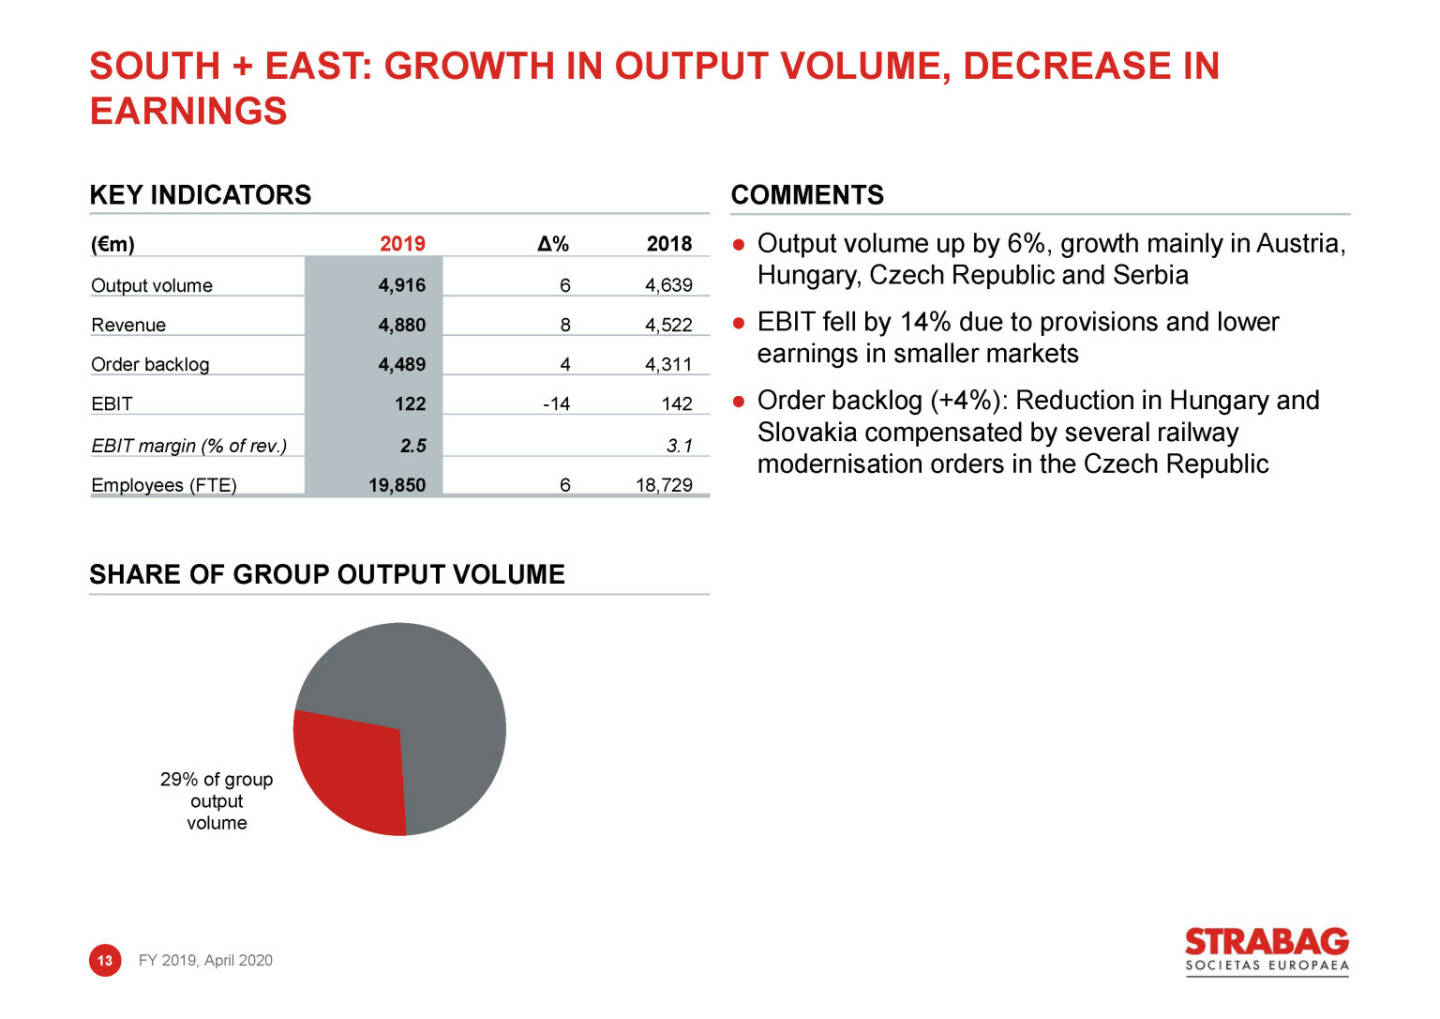 Strabag - south + east: growth in output volume, decrease in earnings